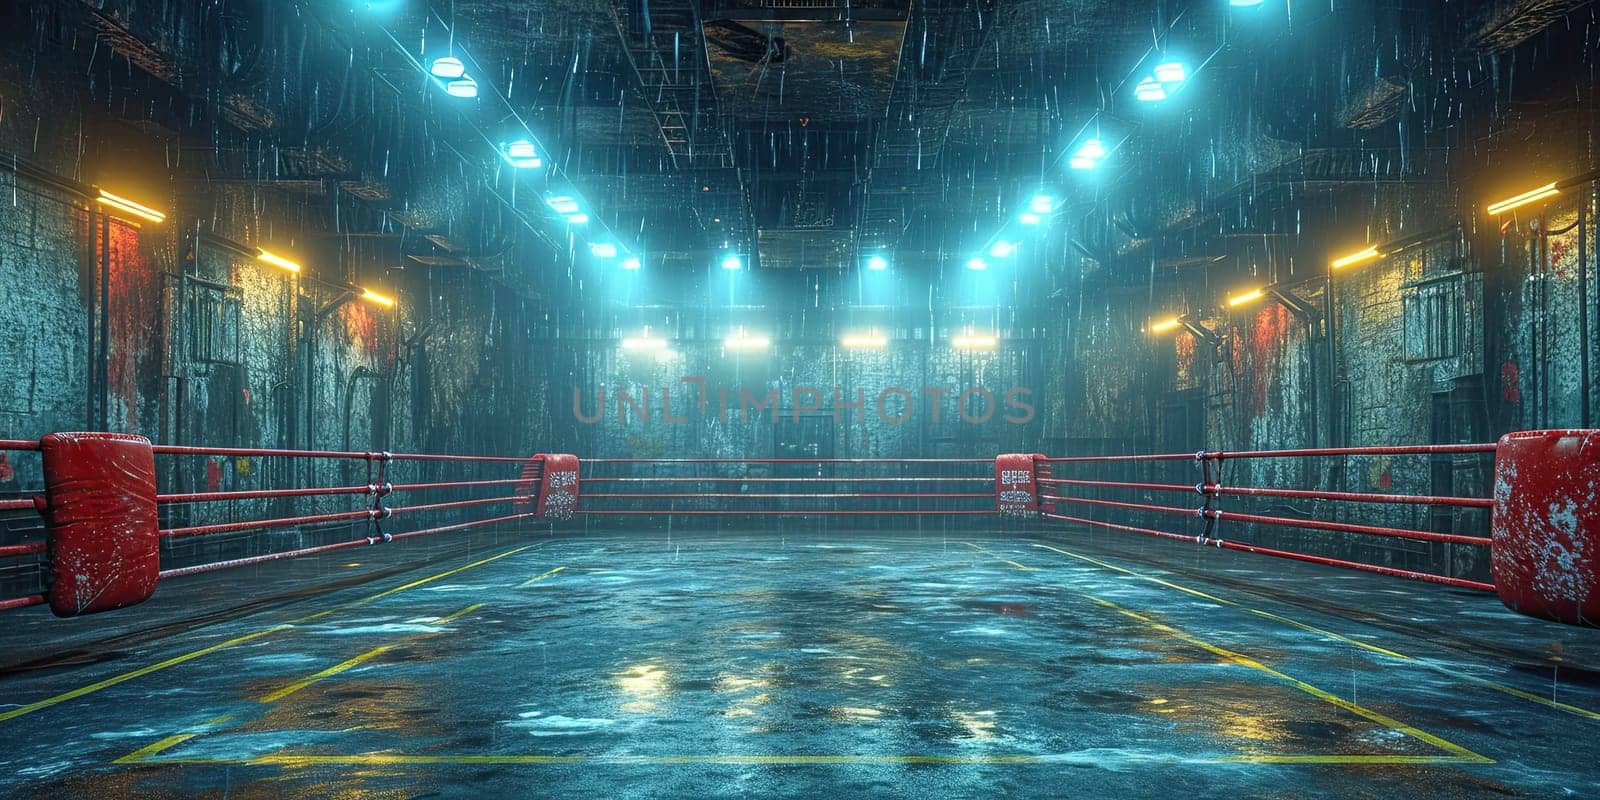 An image capturing the emptiness of a boxing ring adorned with a pair of striking red boxing gloves.